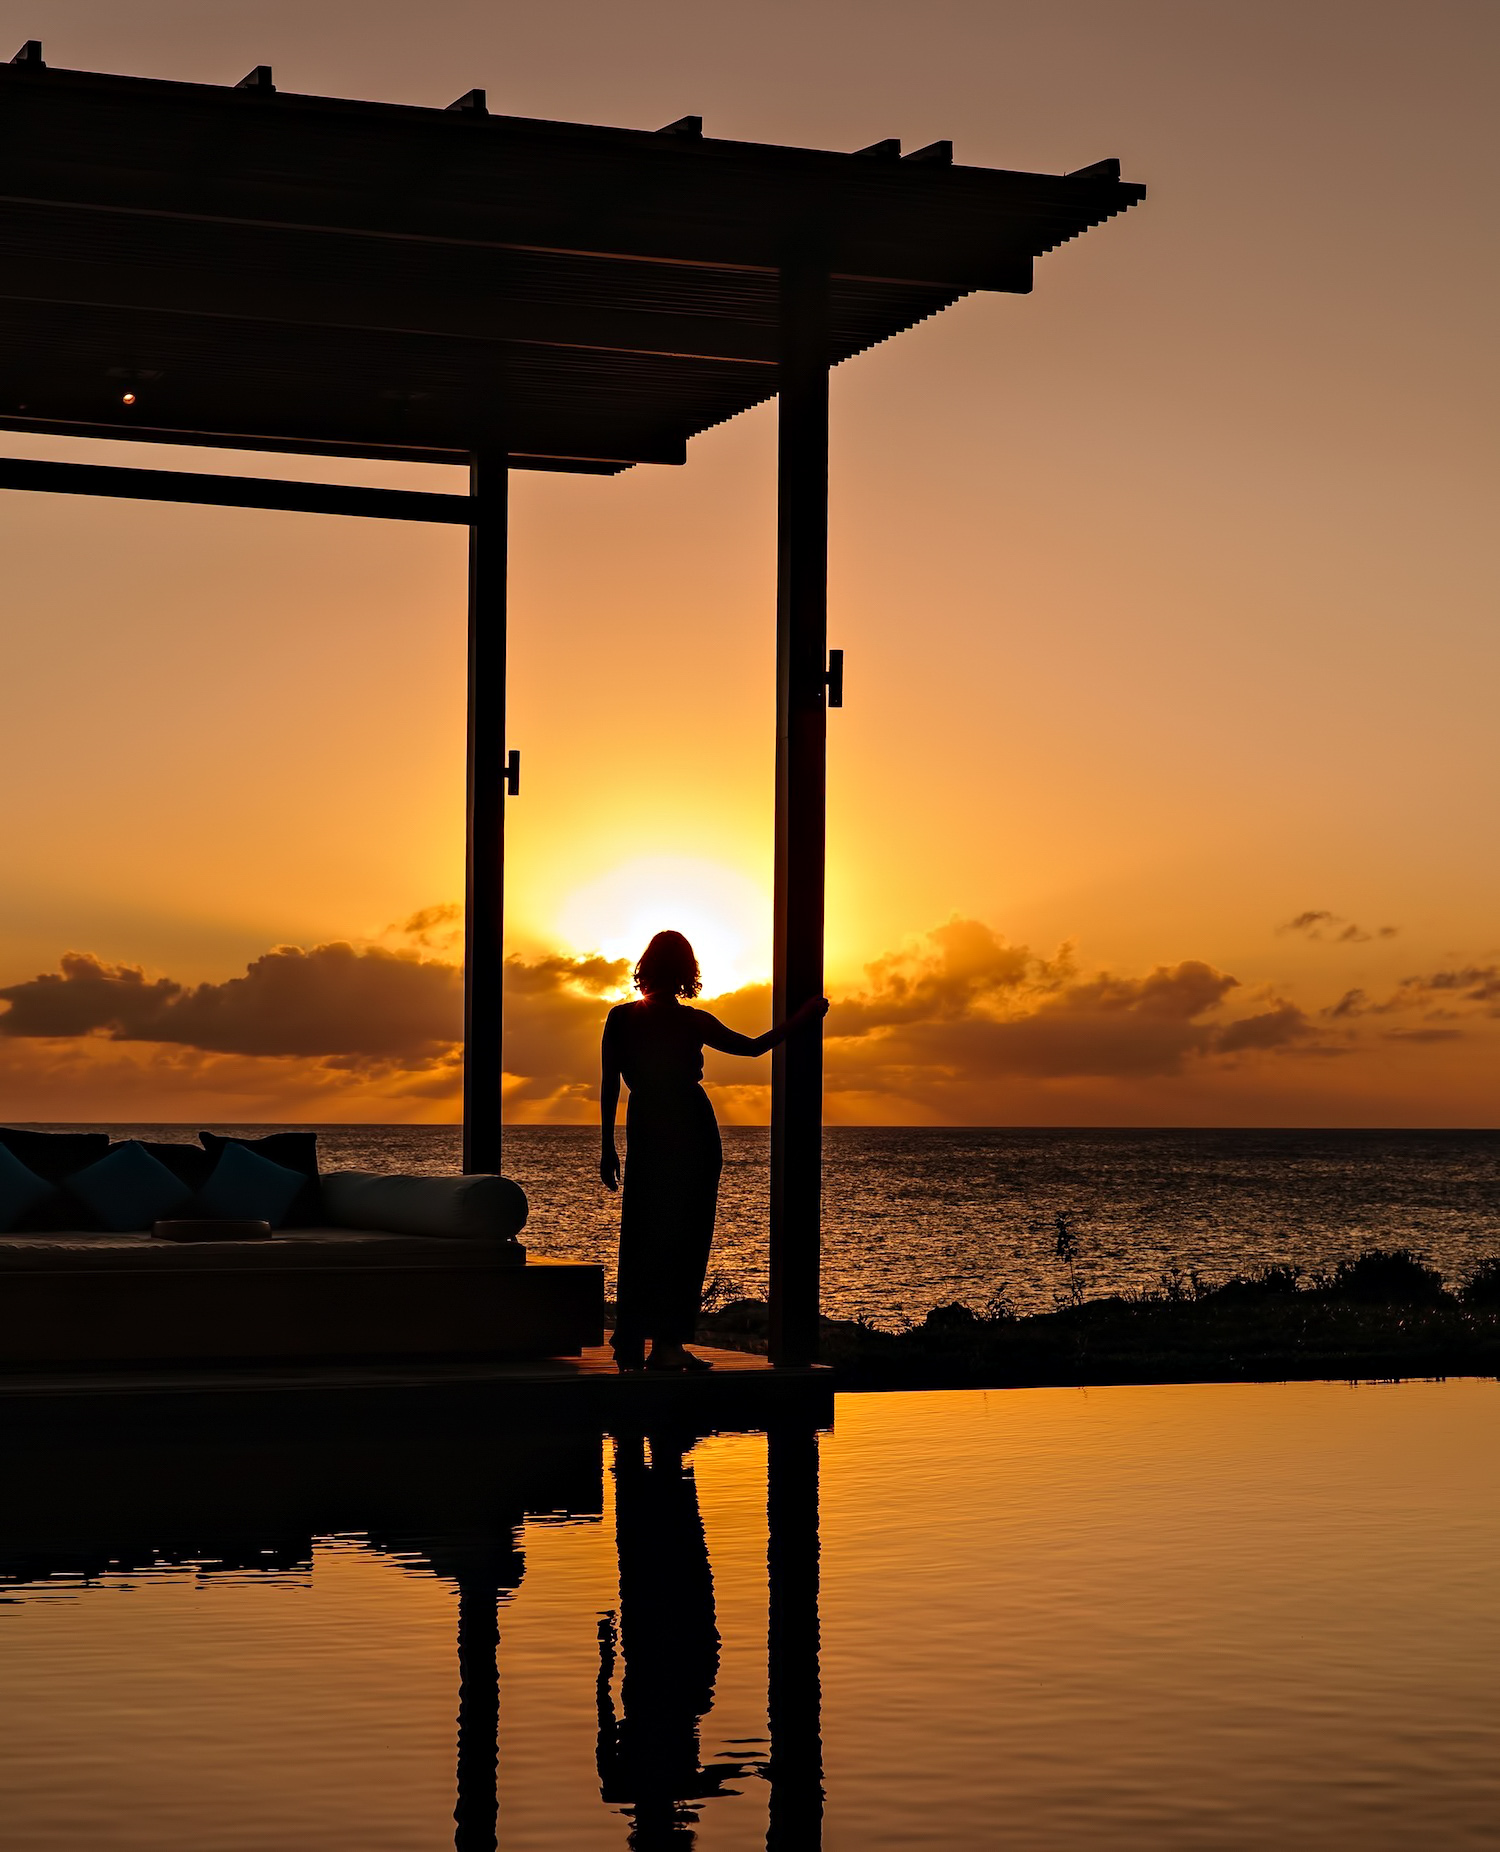 Amanyara Resort – Providenciales, Turks and Caicos Islands – Sunset Pool Lounge View